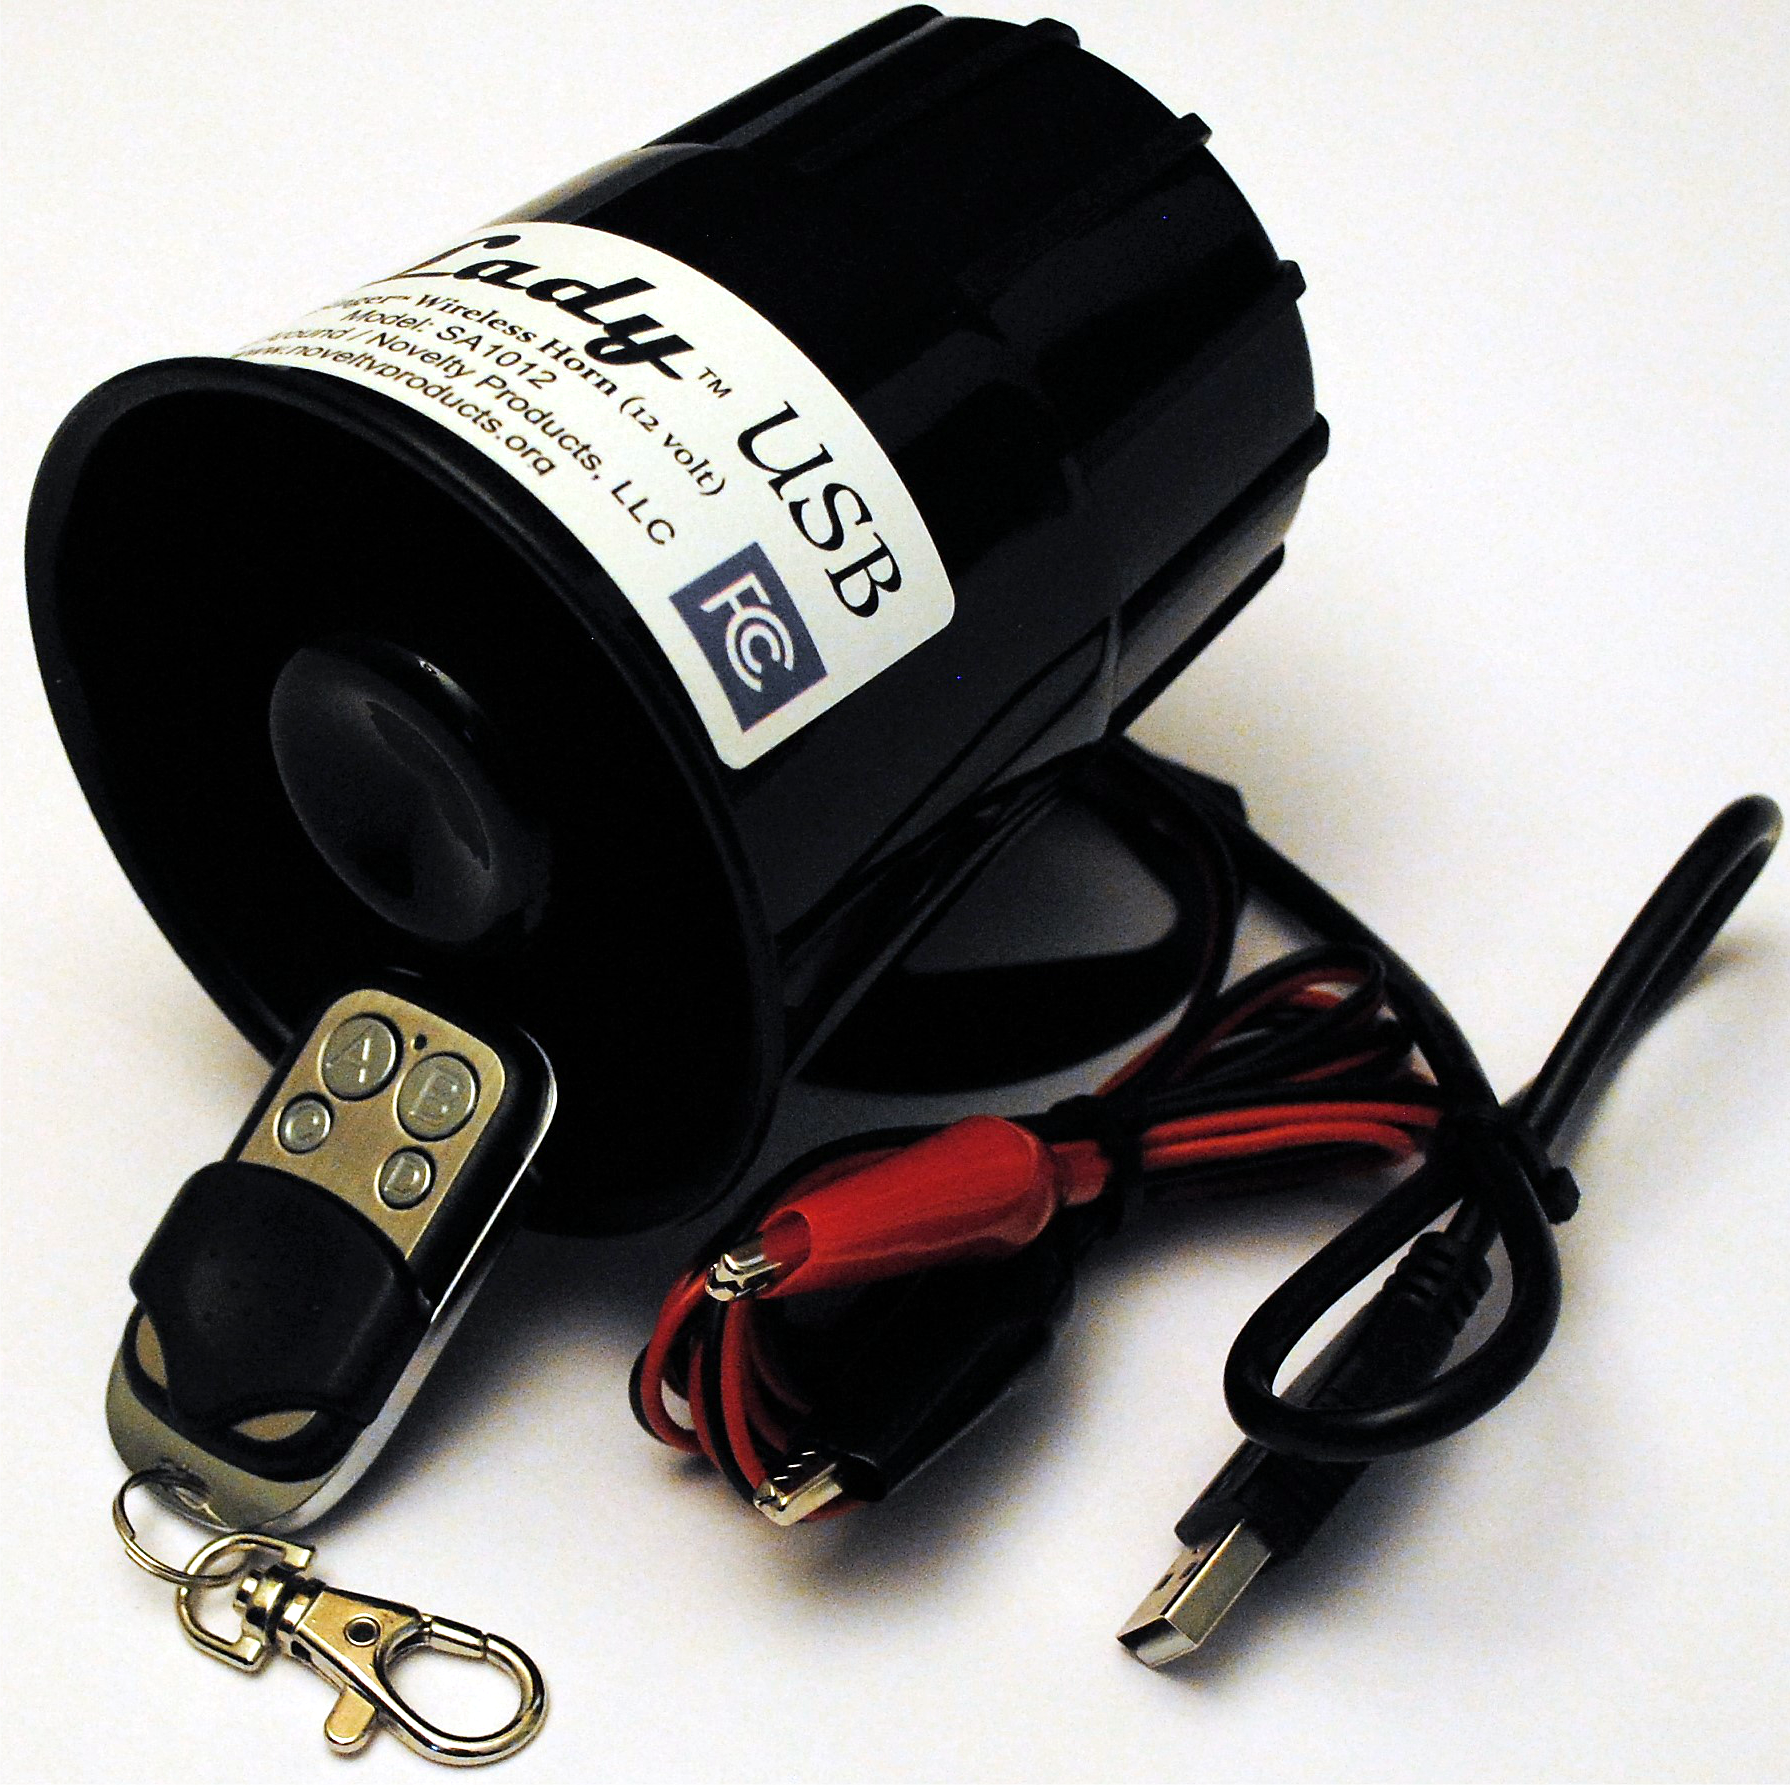 Titanic Whistle USB Car Horn with Wireless KeyFOB Remote